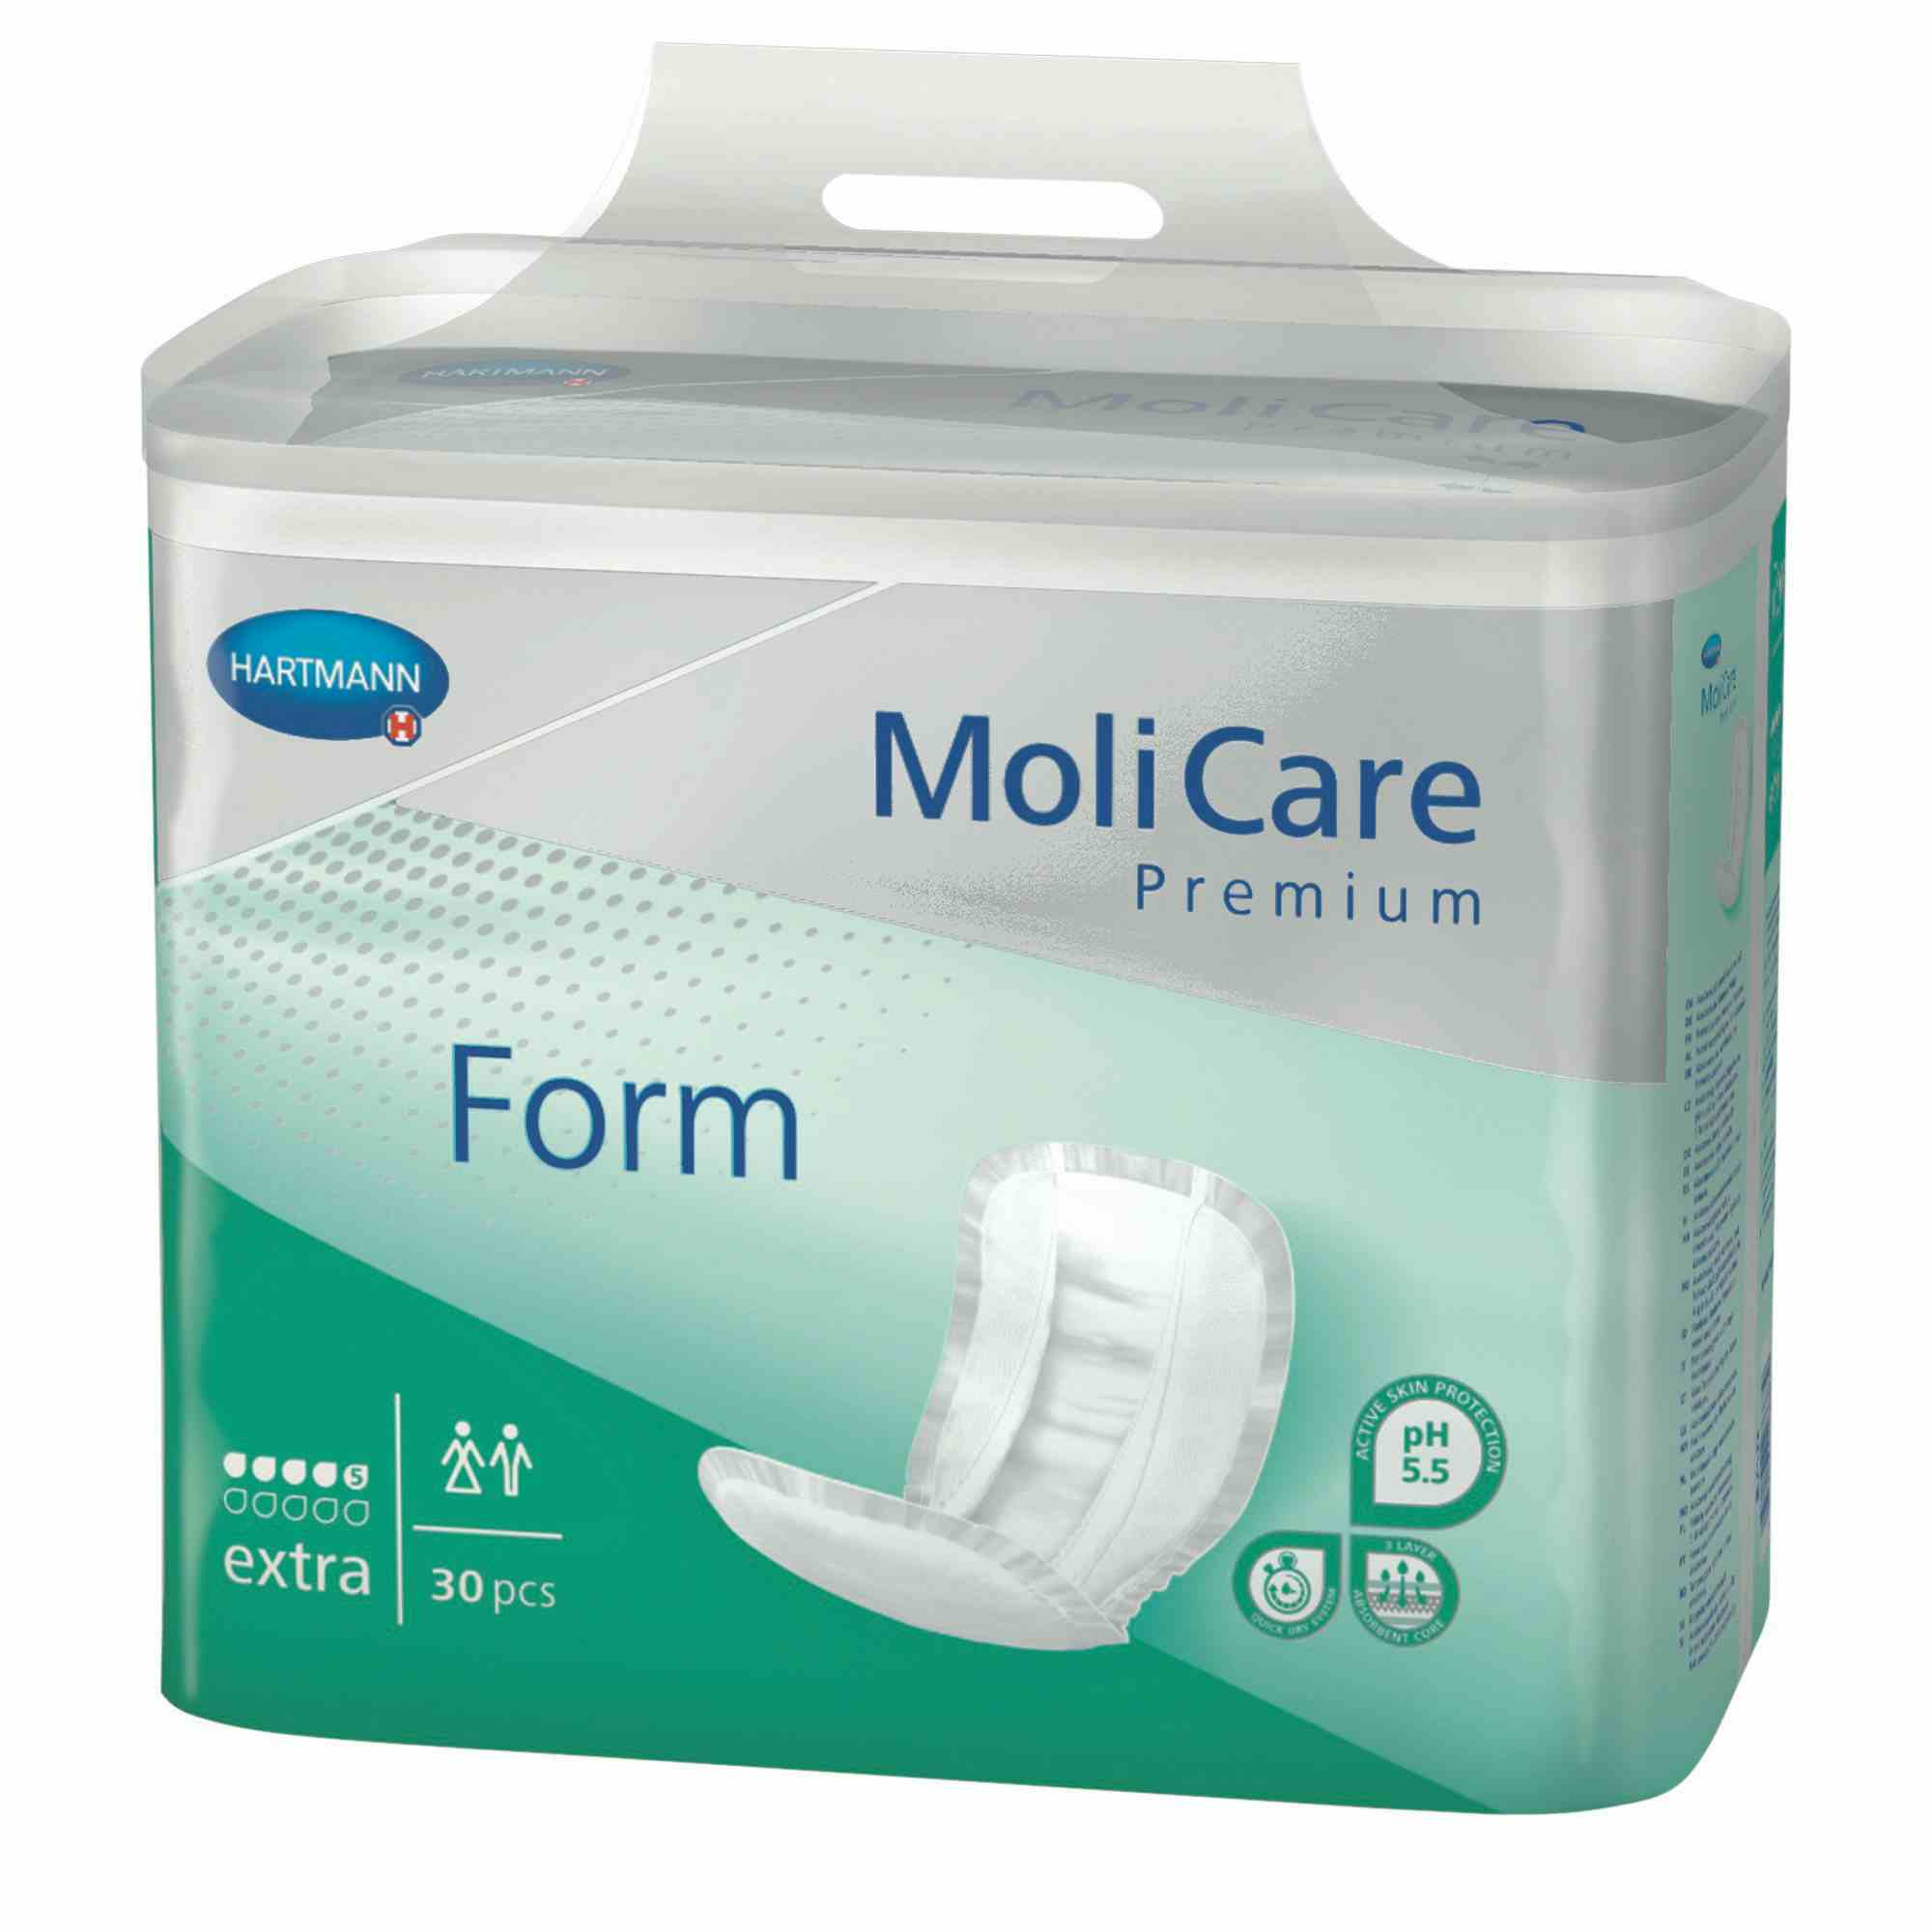 MoliCare Premium Form Bladder Control Pad, Moderate Absorbency , 168219, Case of 120 (4 Bags)